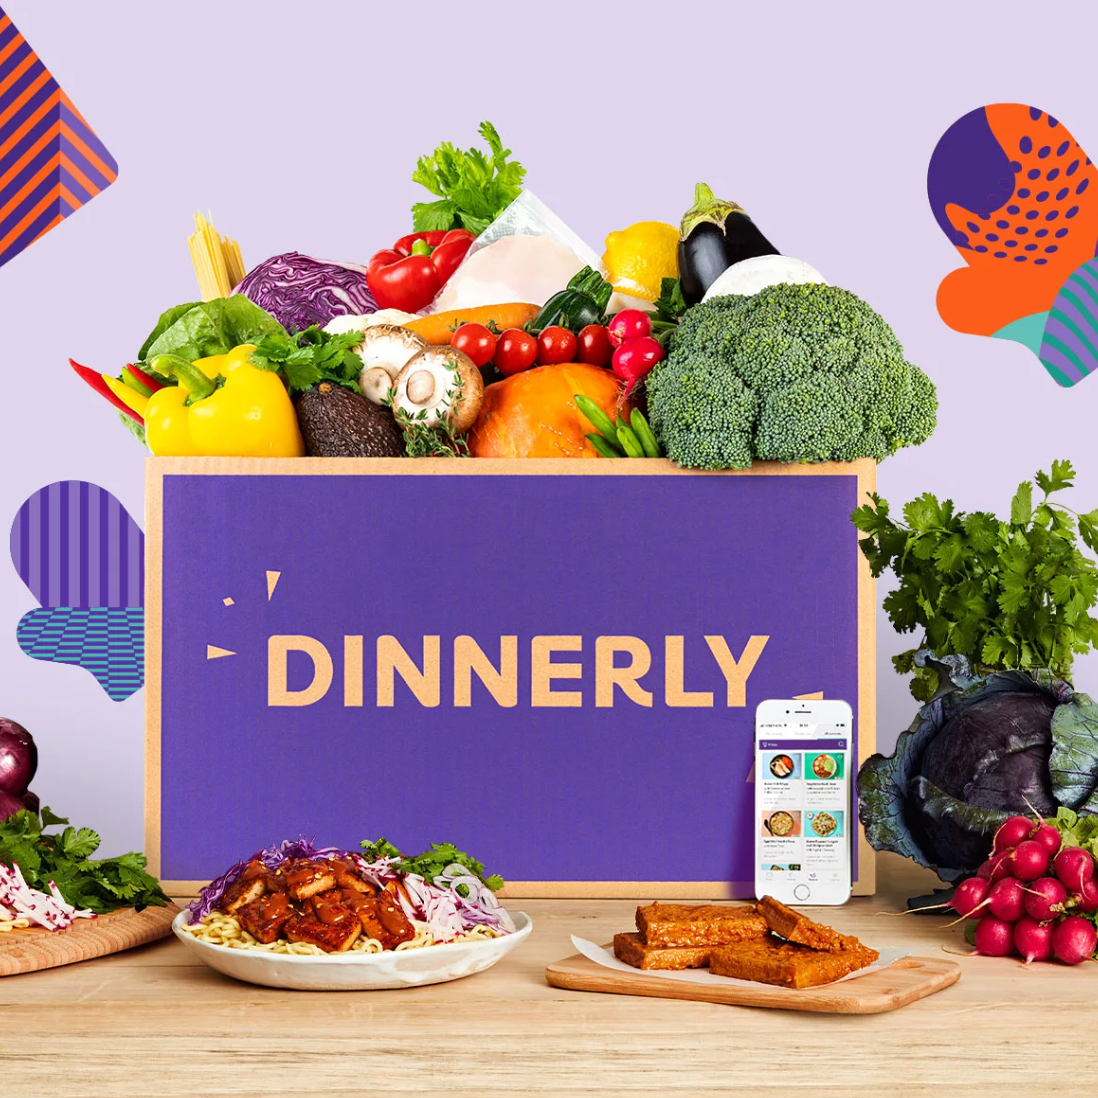 New Meal Kit Delivery Service to Launch Next Month - Baltimore